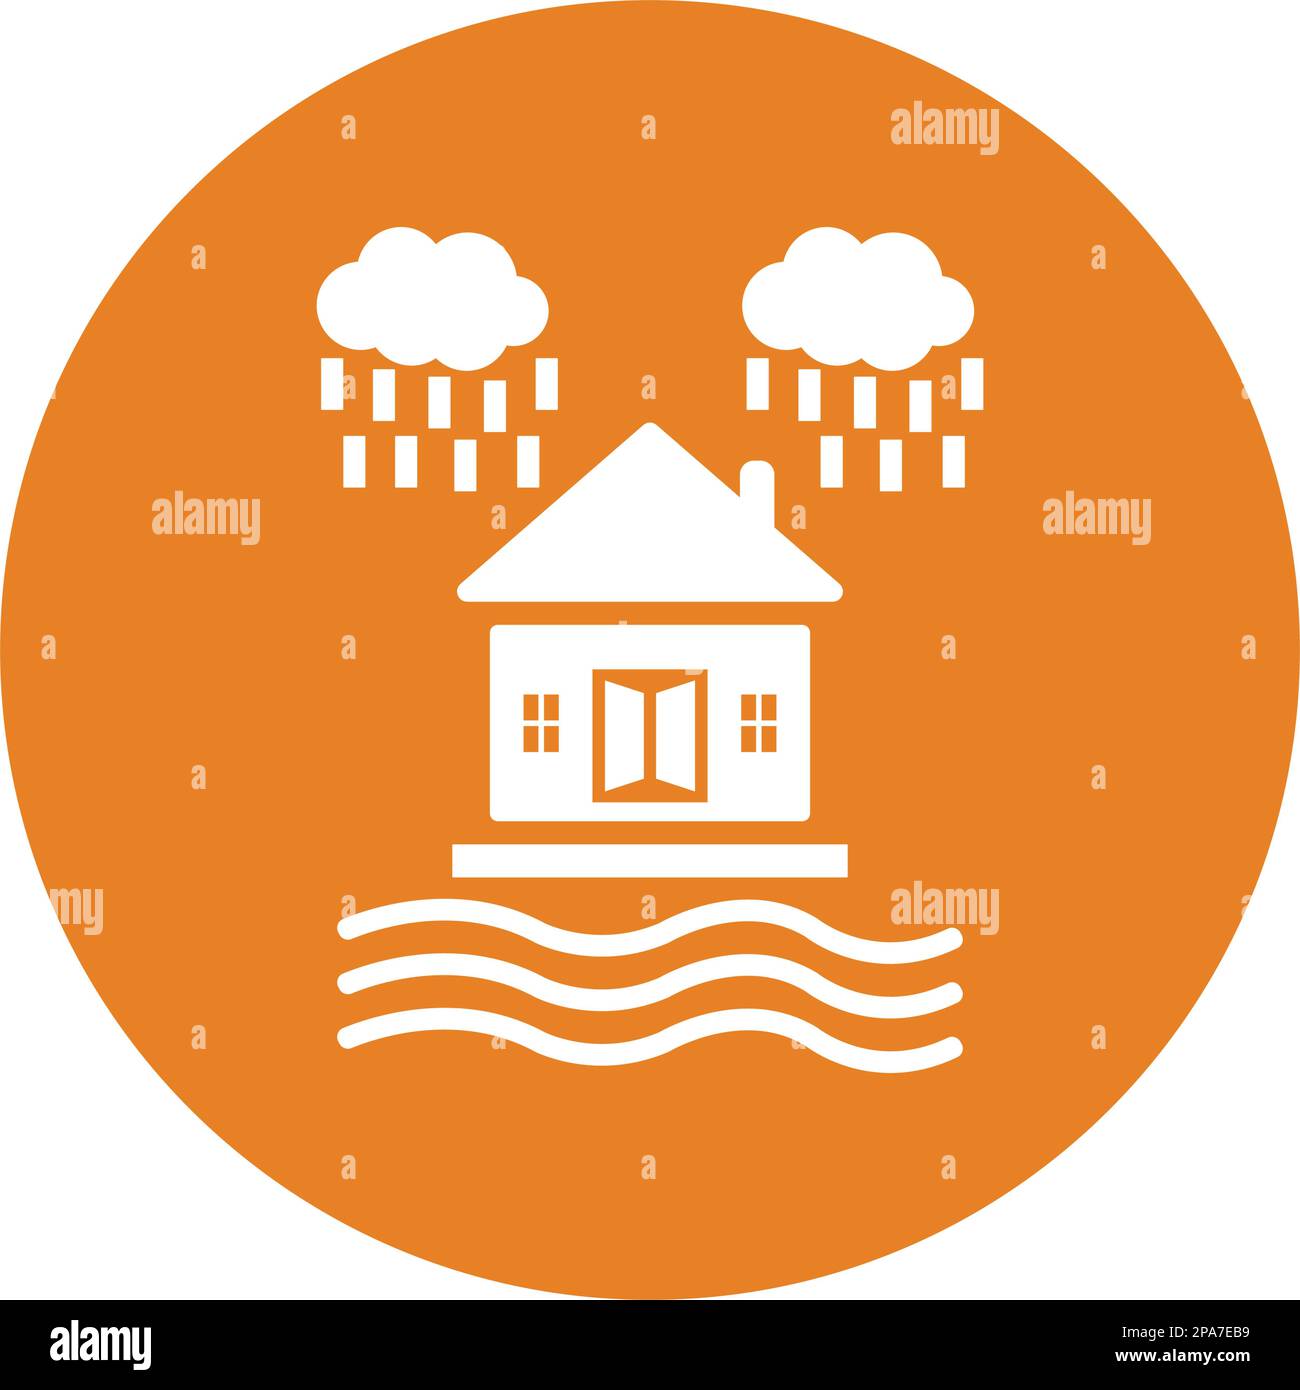 Disaster, flood, home insurance, water icon. Use for commercial, print media, web or any type of design projects. Stock Vector